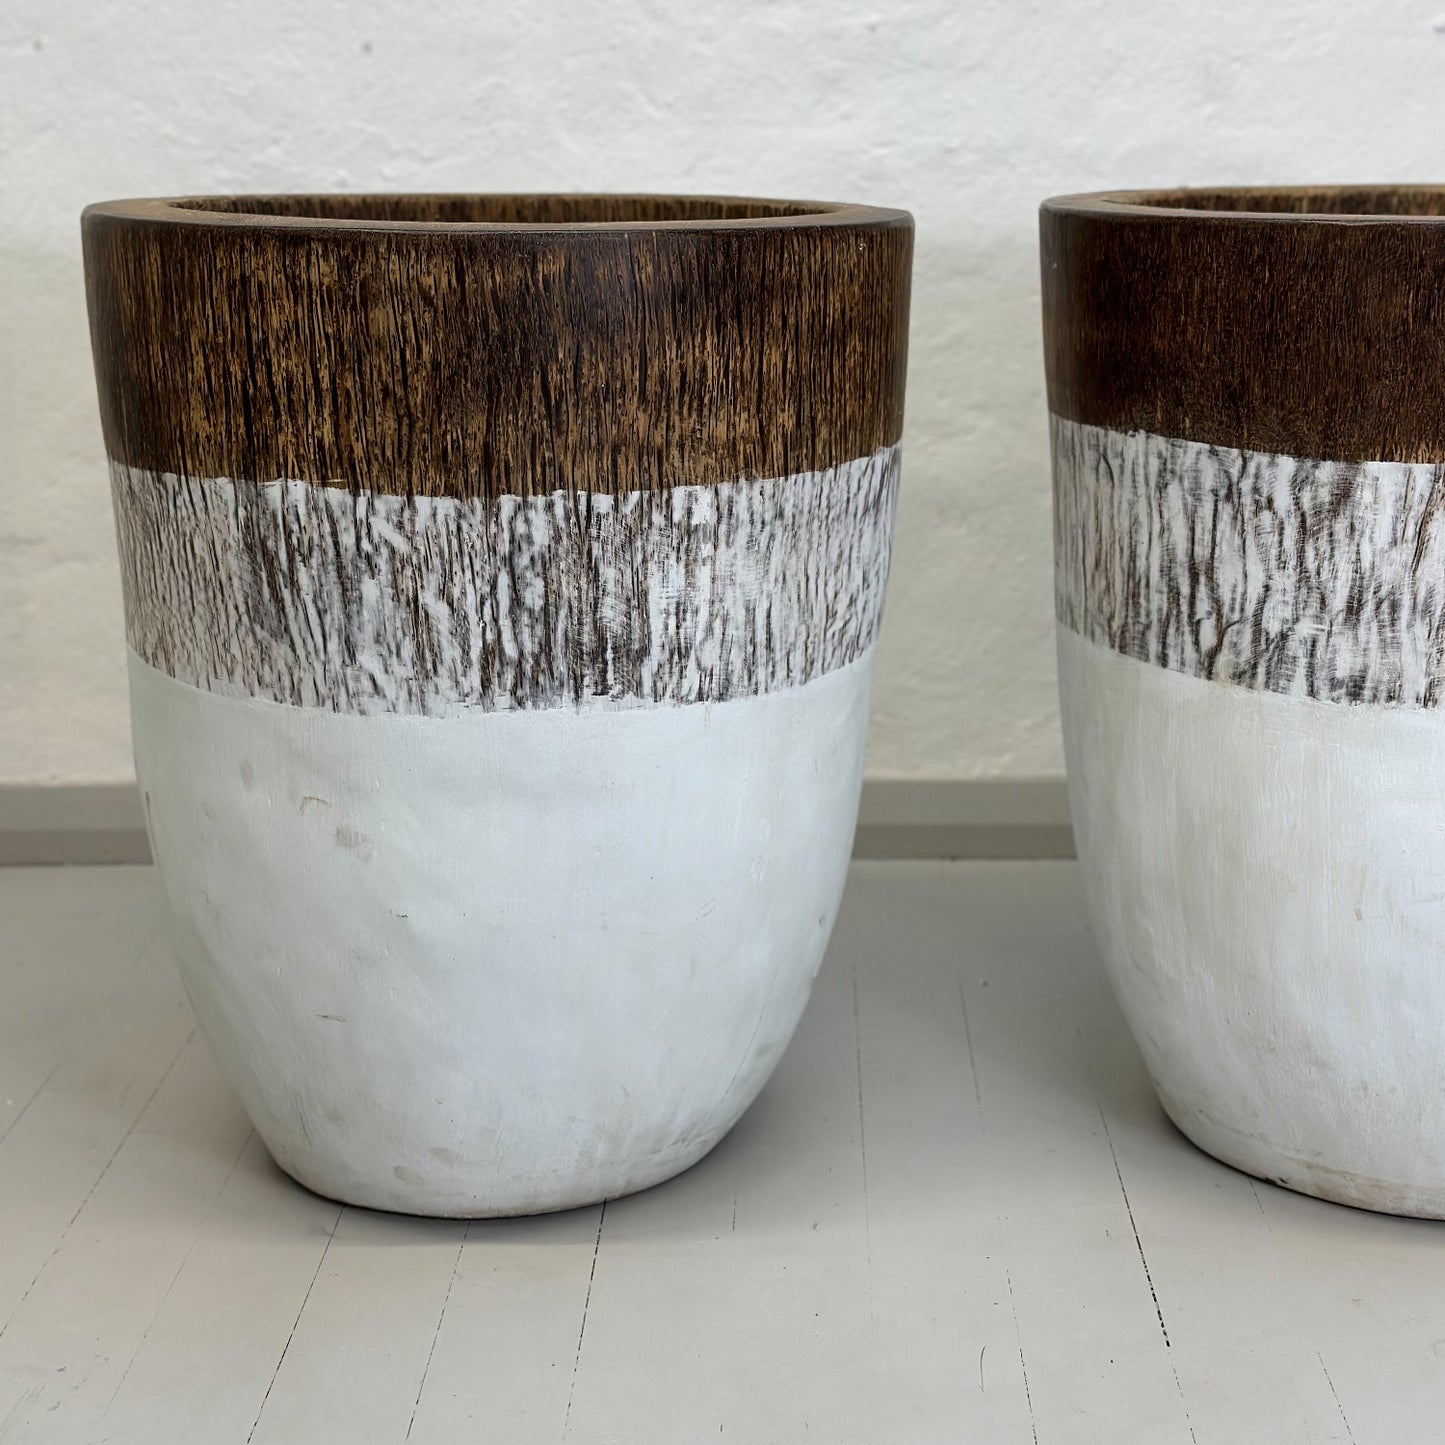 Carved Palm Pot with White Stripes